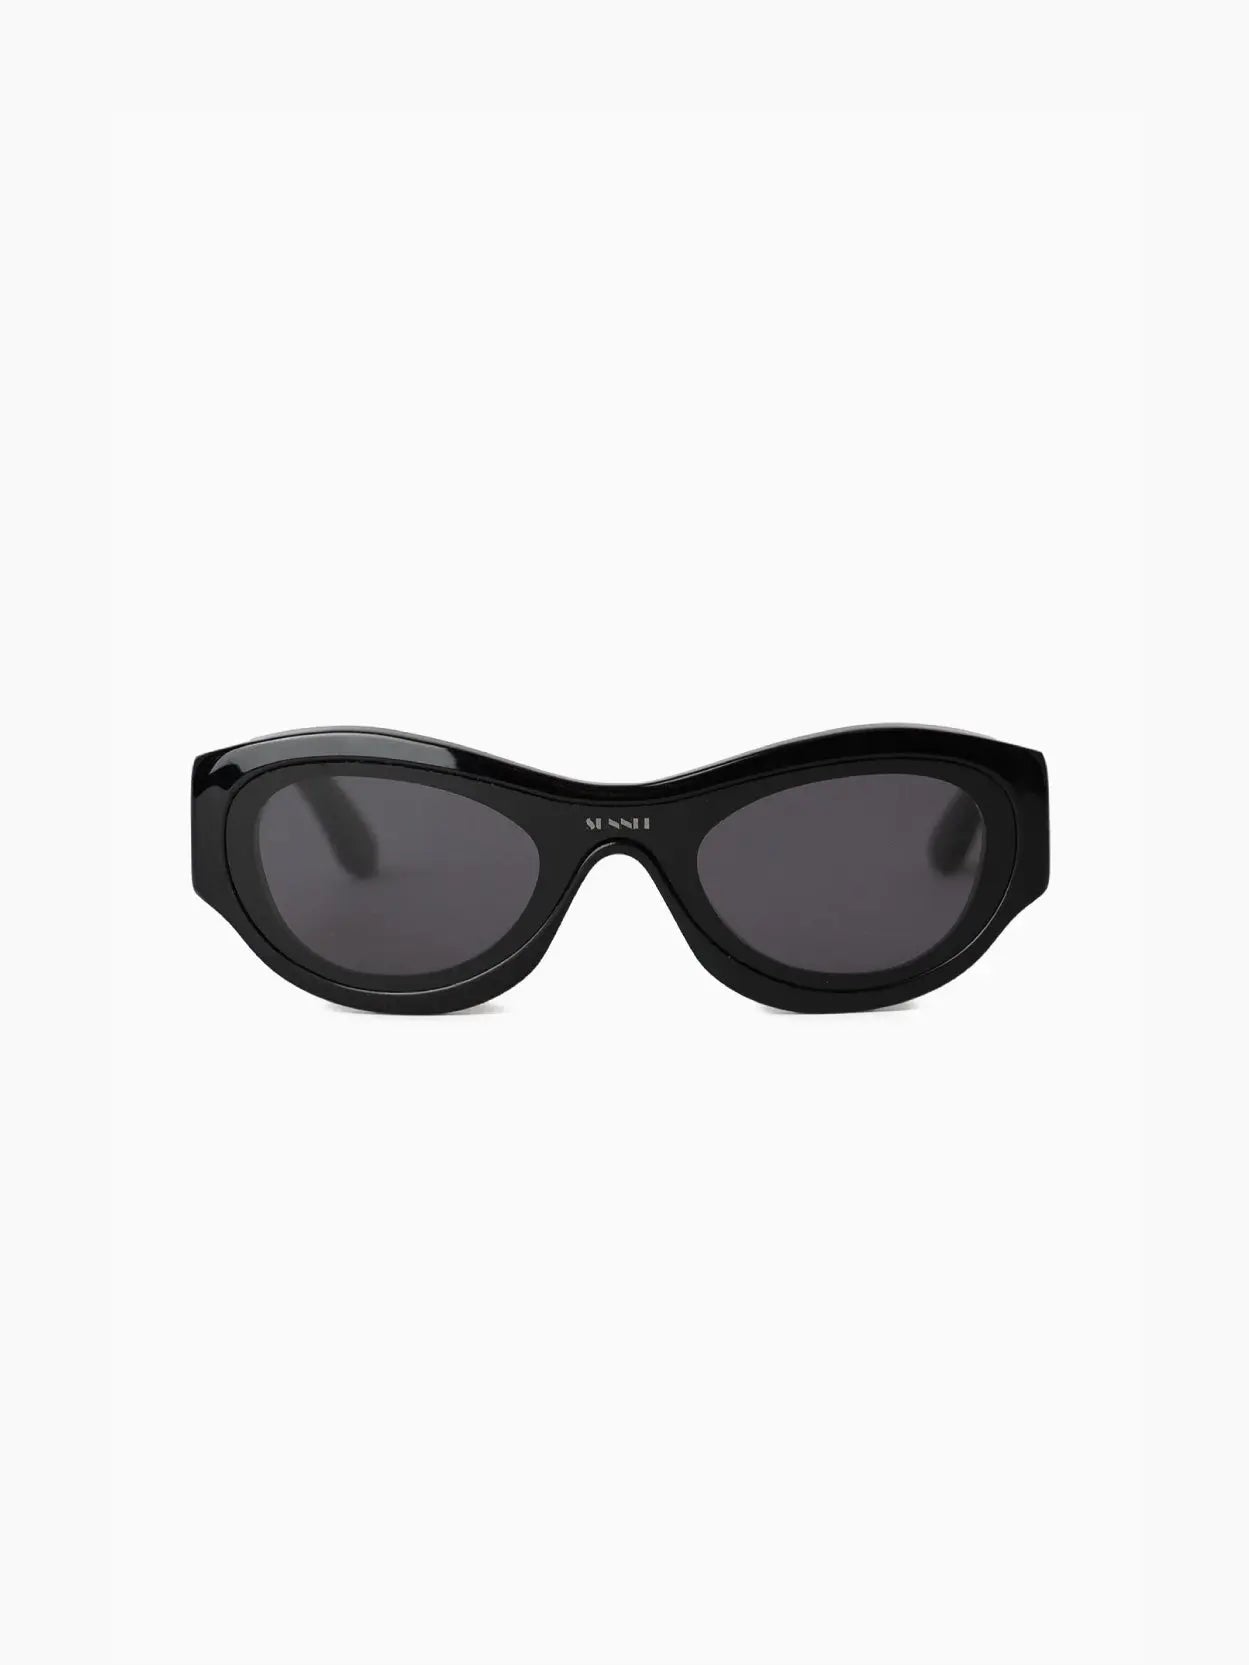 A pair of Prototipo 5 Sunglasses Black with dark lenses, featuring a subtle "Sunnei" logo on the left lens, available at Bassalstore in Barcelona.